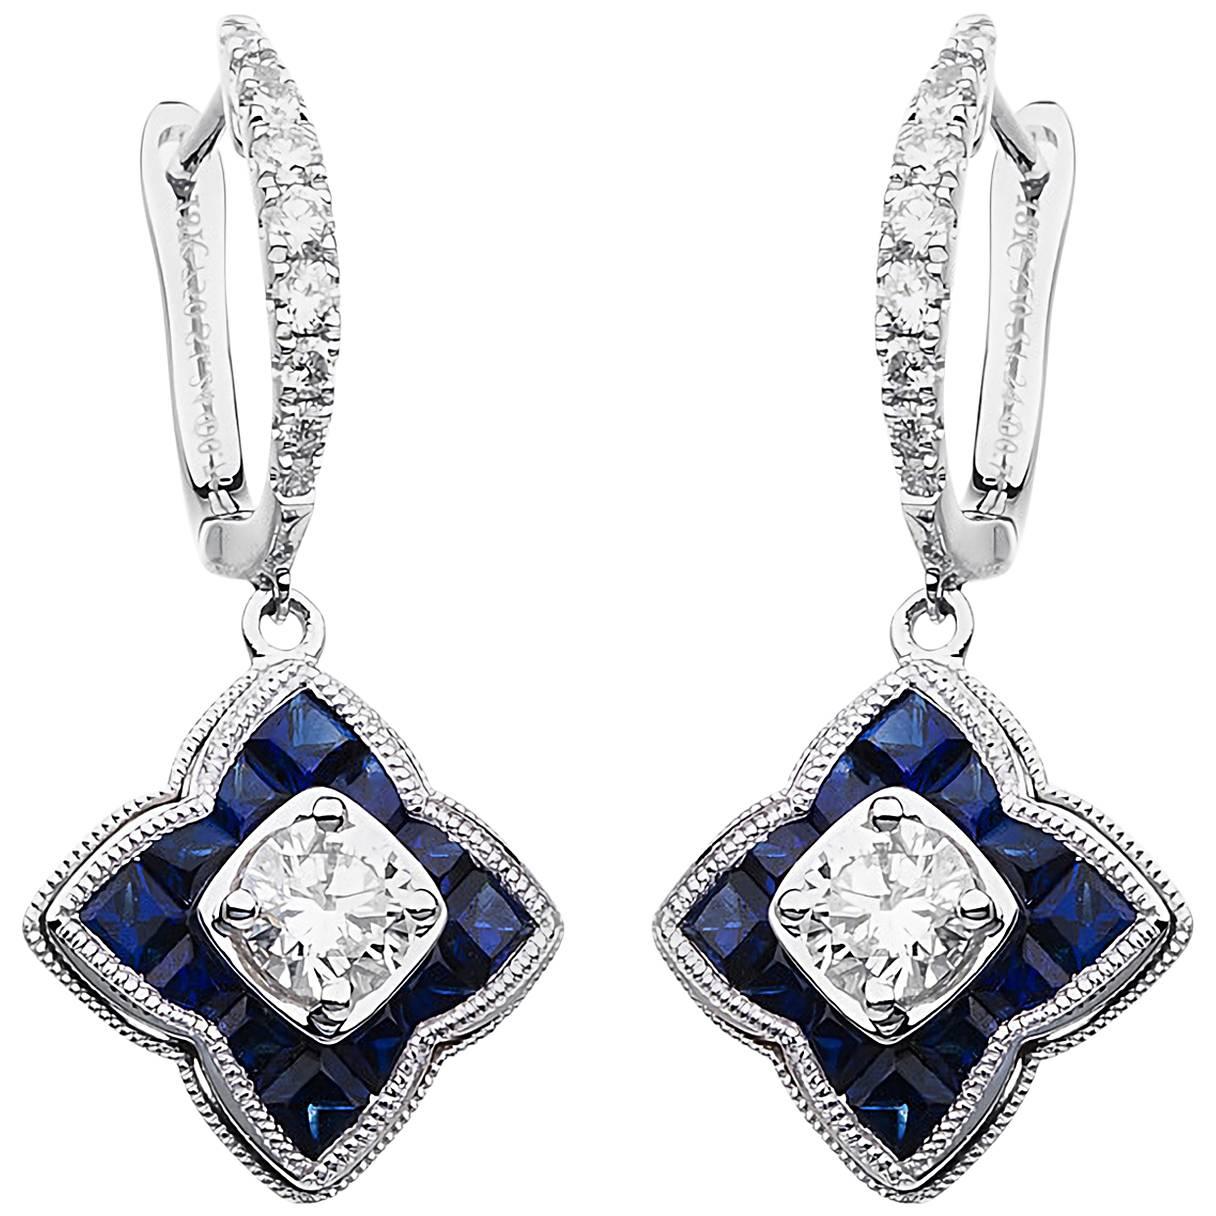 Carlos Udozzo 18 Karat White Gold Blue Sapphire and Diamond Earrings For Sale